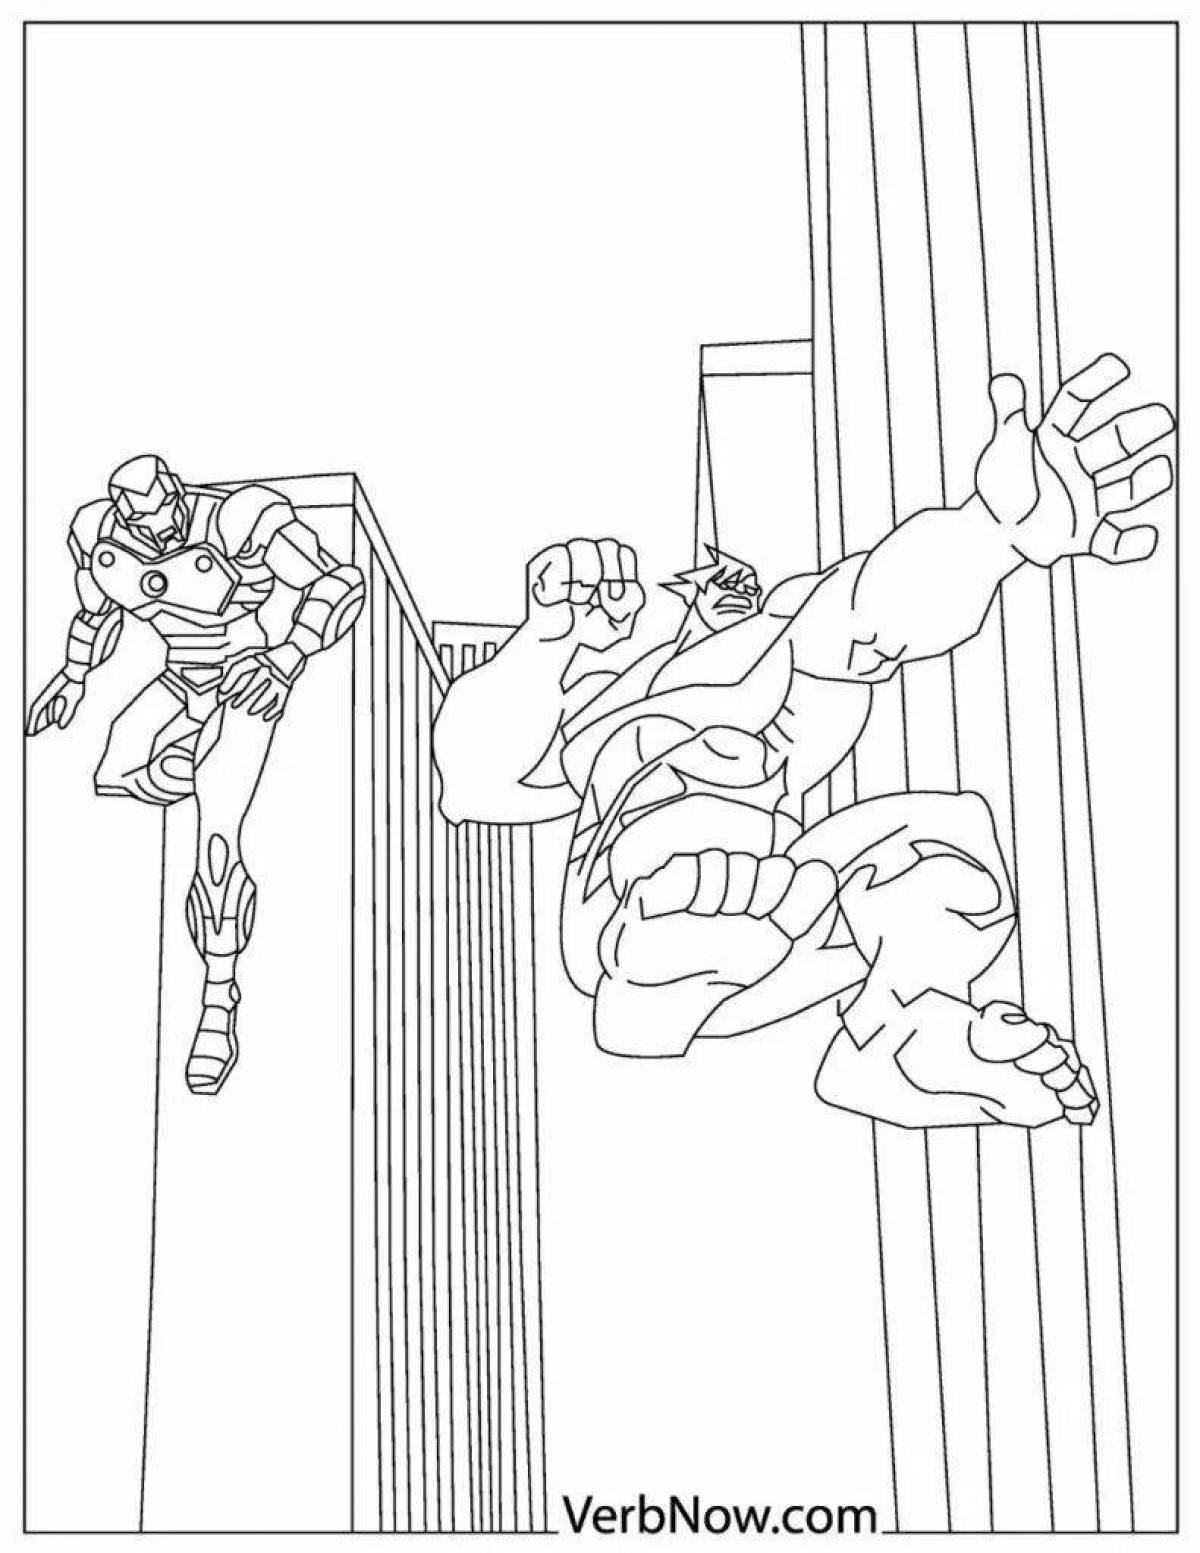 Hulk and Spider-Man fun coloring book for kids